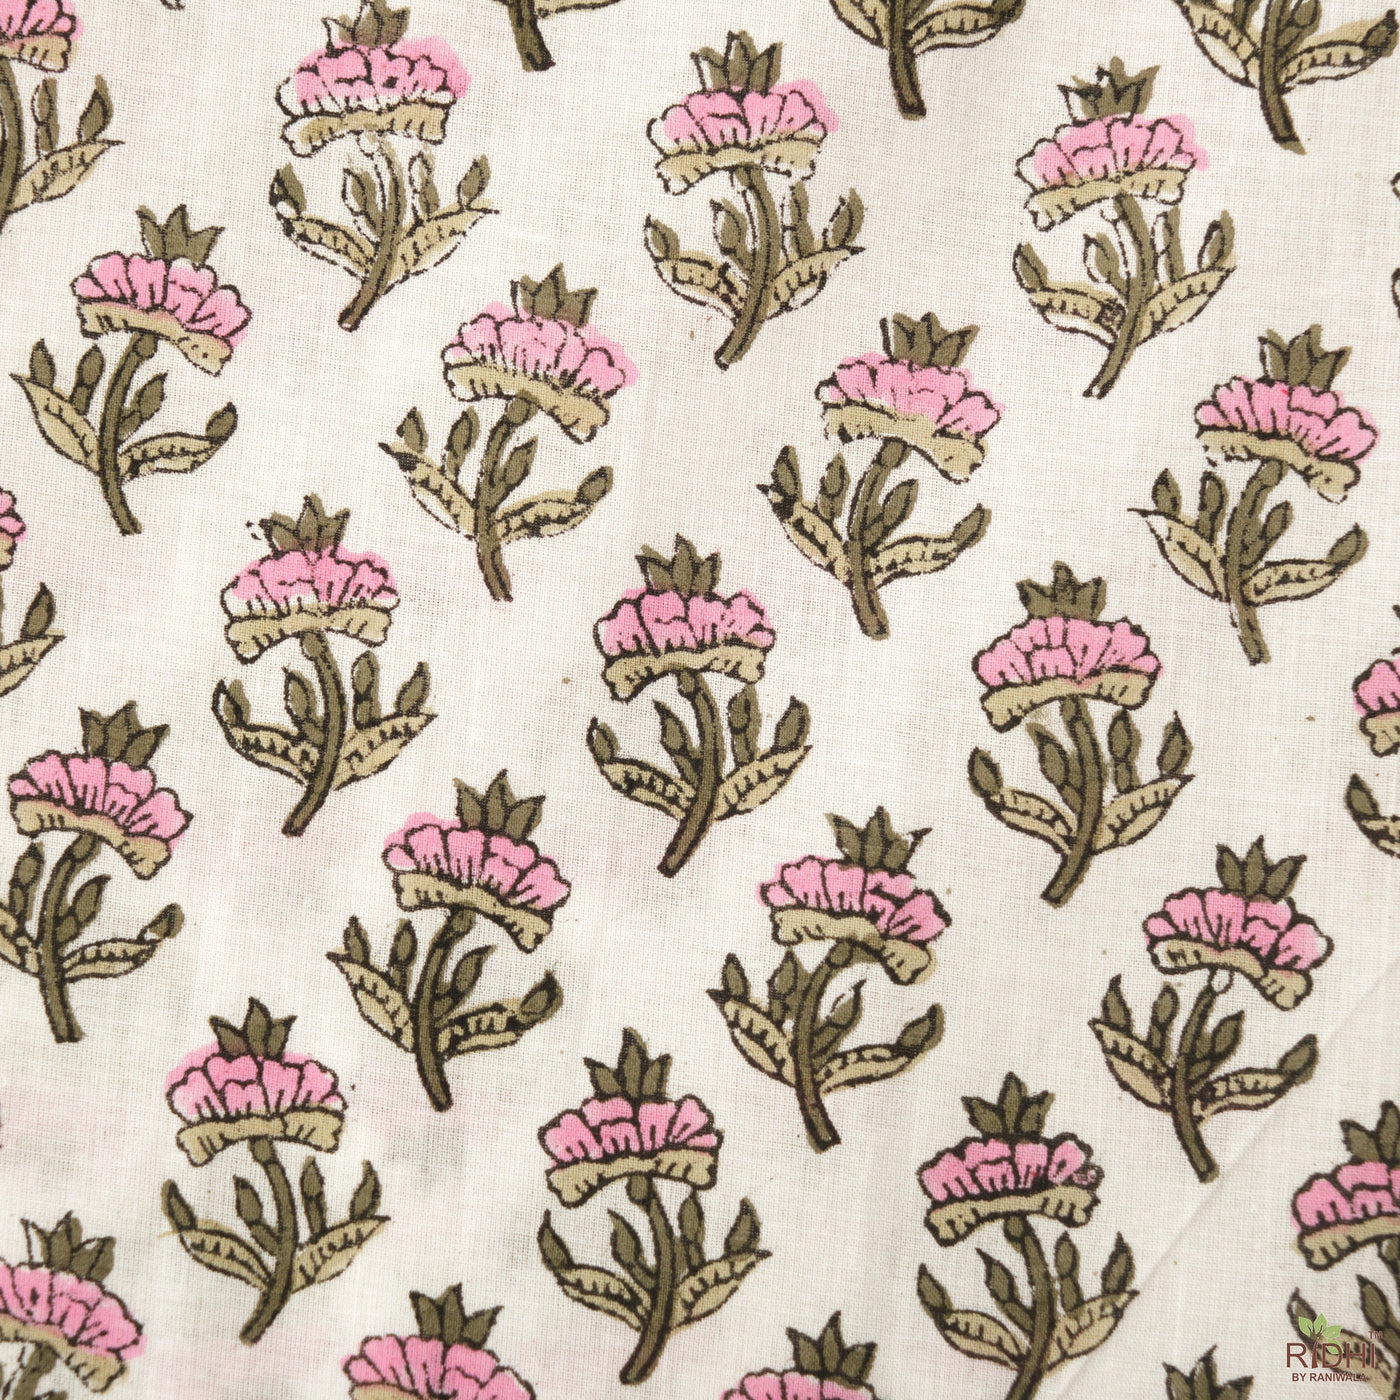 Fabricrush Taffy Pink, Asparagus and Army Green Indian Hand Block Printed 100% Pure Cotton Cloth, Fabric by the yard, Fabric for Women's Clothing Bags